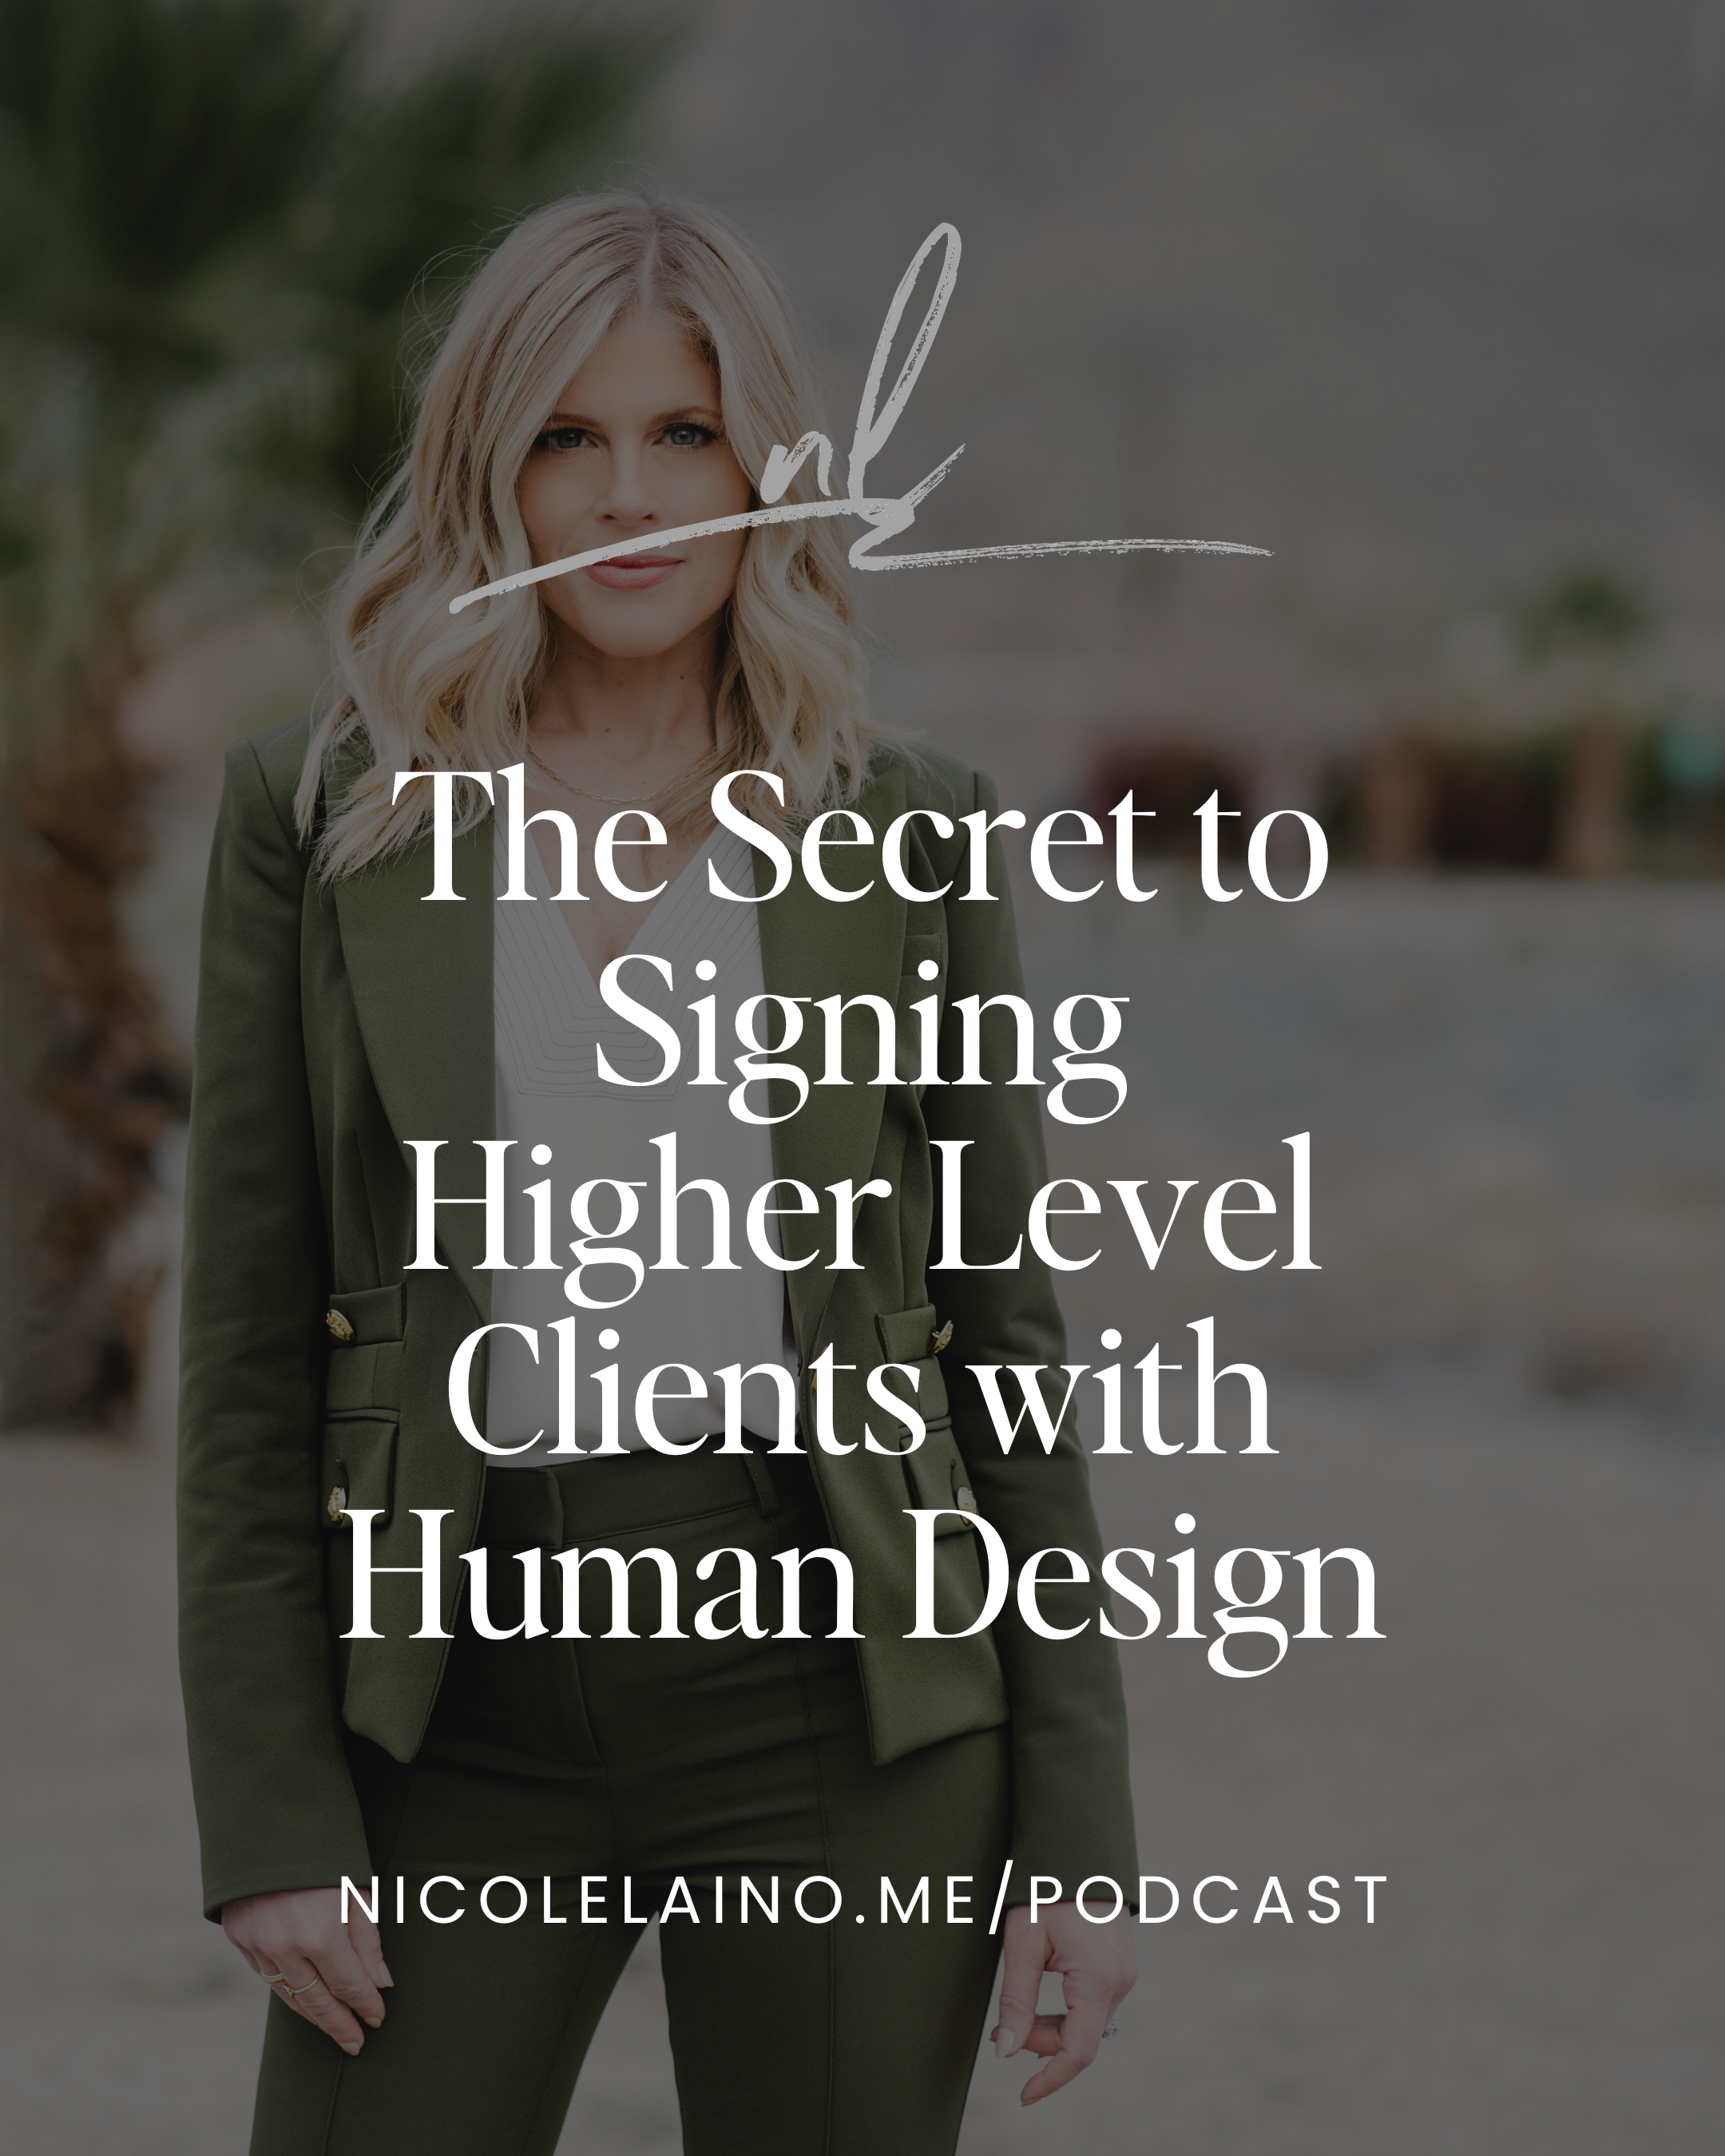 The Secret to Signing Higher Level Clients with Human Design